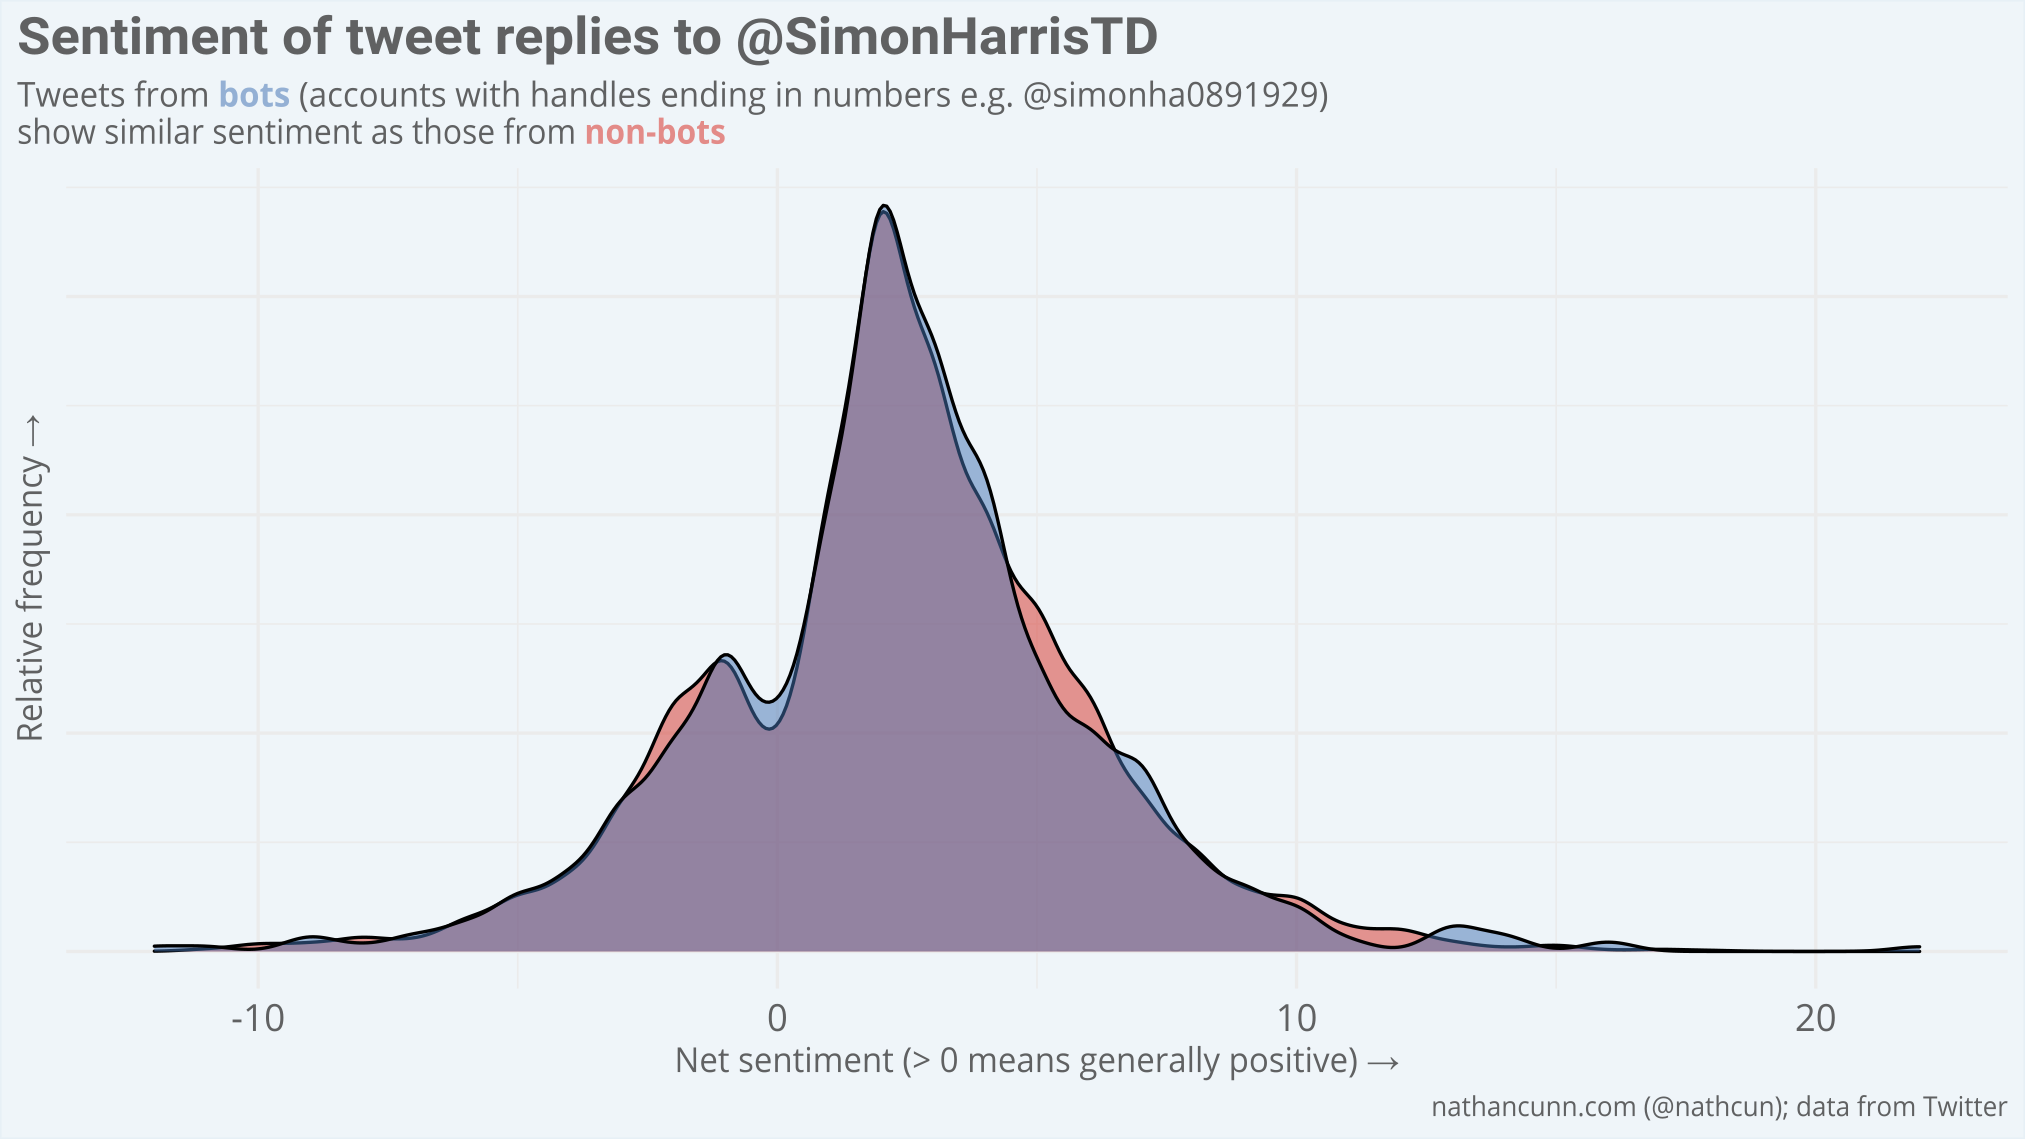 A density plot of the sentiment score of tweet replies to @SimonHarrisTD broken down by supposed bots and non-bots where bots are identified by having formulaic Twitter handles. No difference is observed between the two groups.